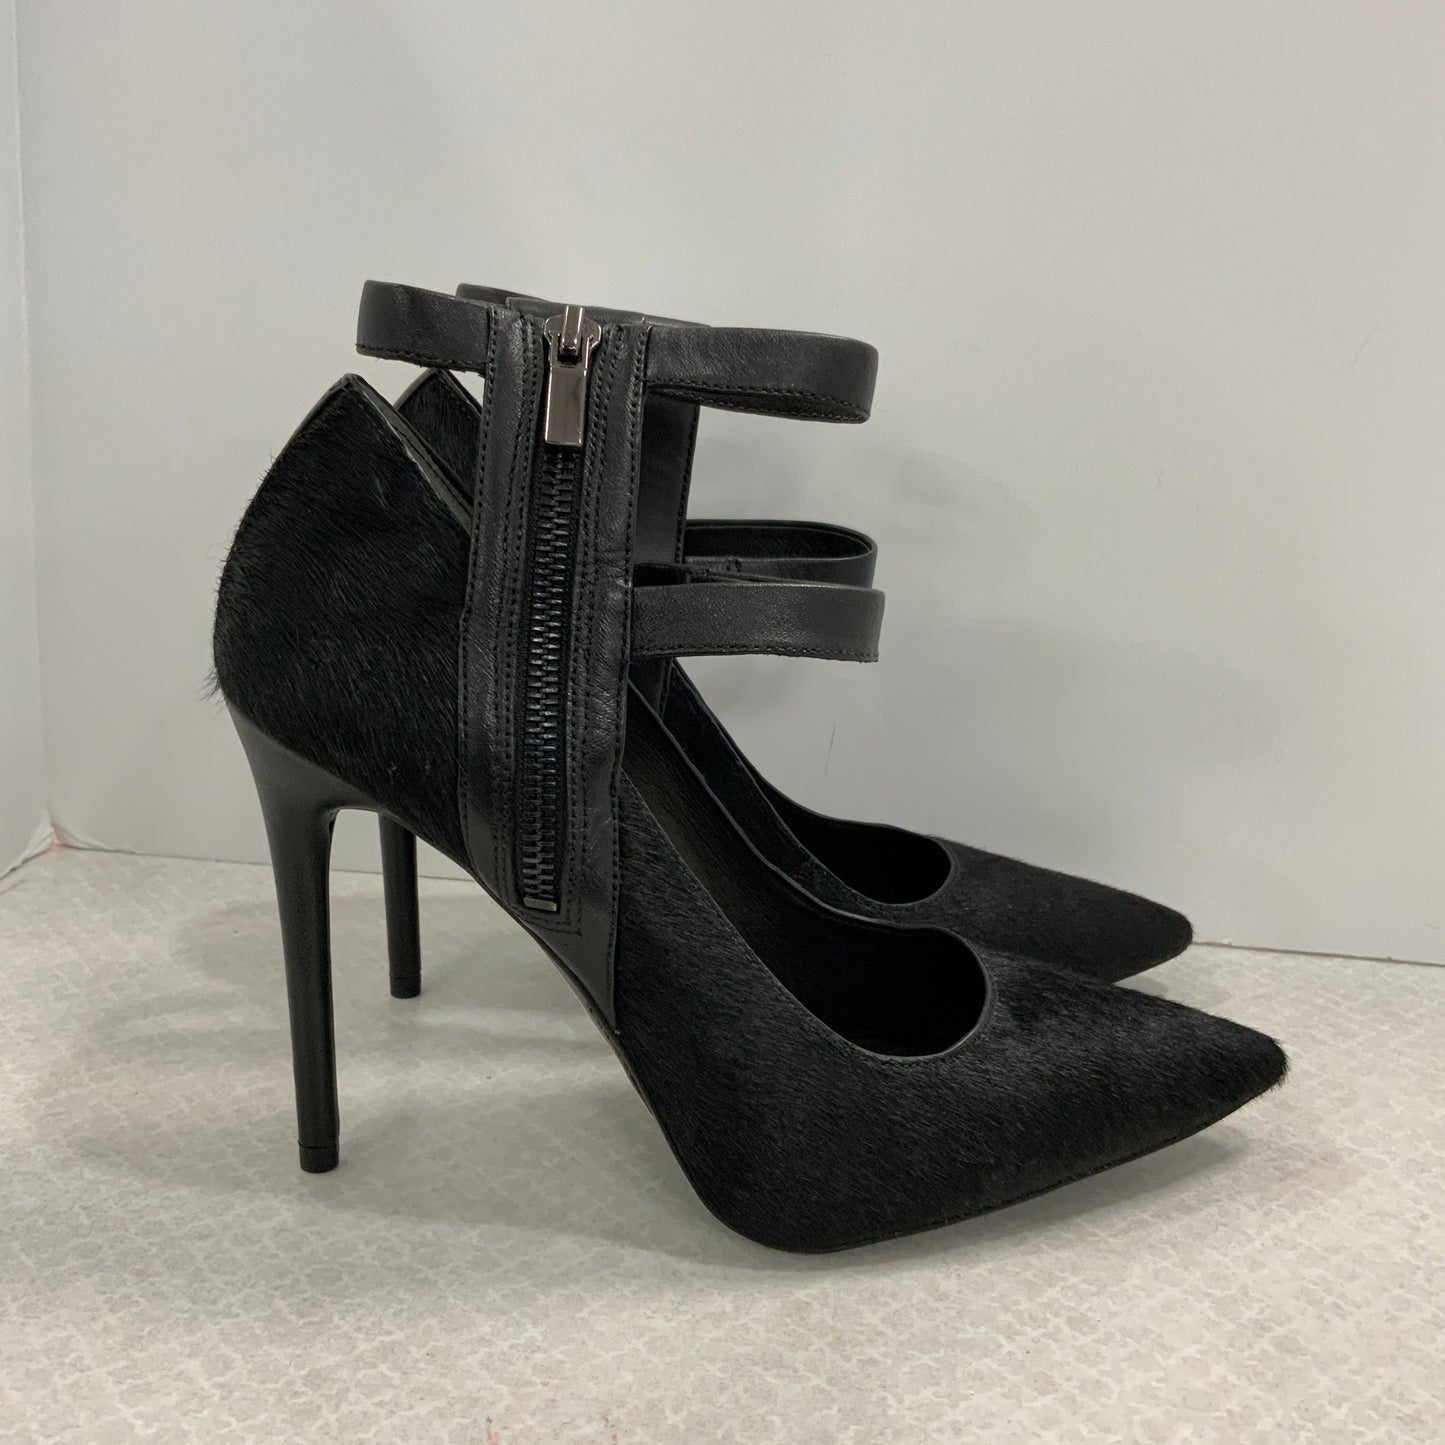 Black Shoes Heels Stiletto Kenneth Cole, Size 9